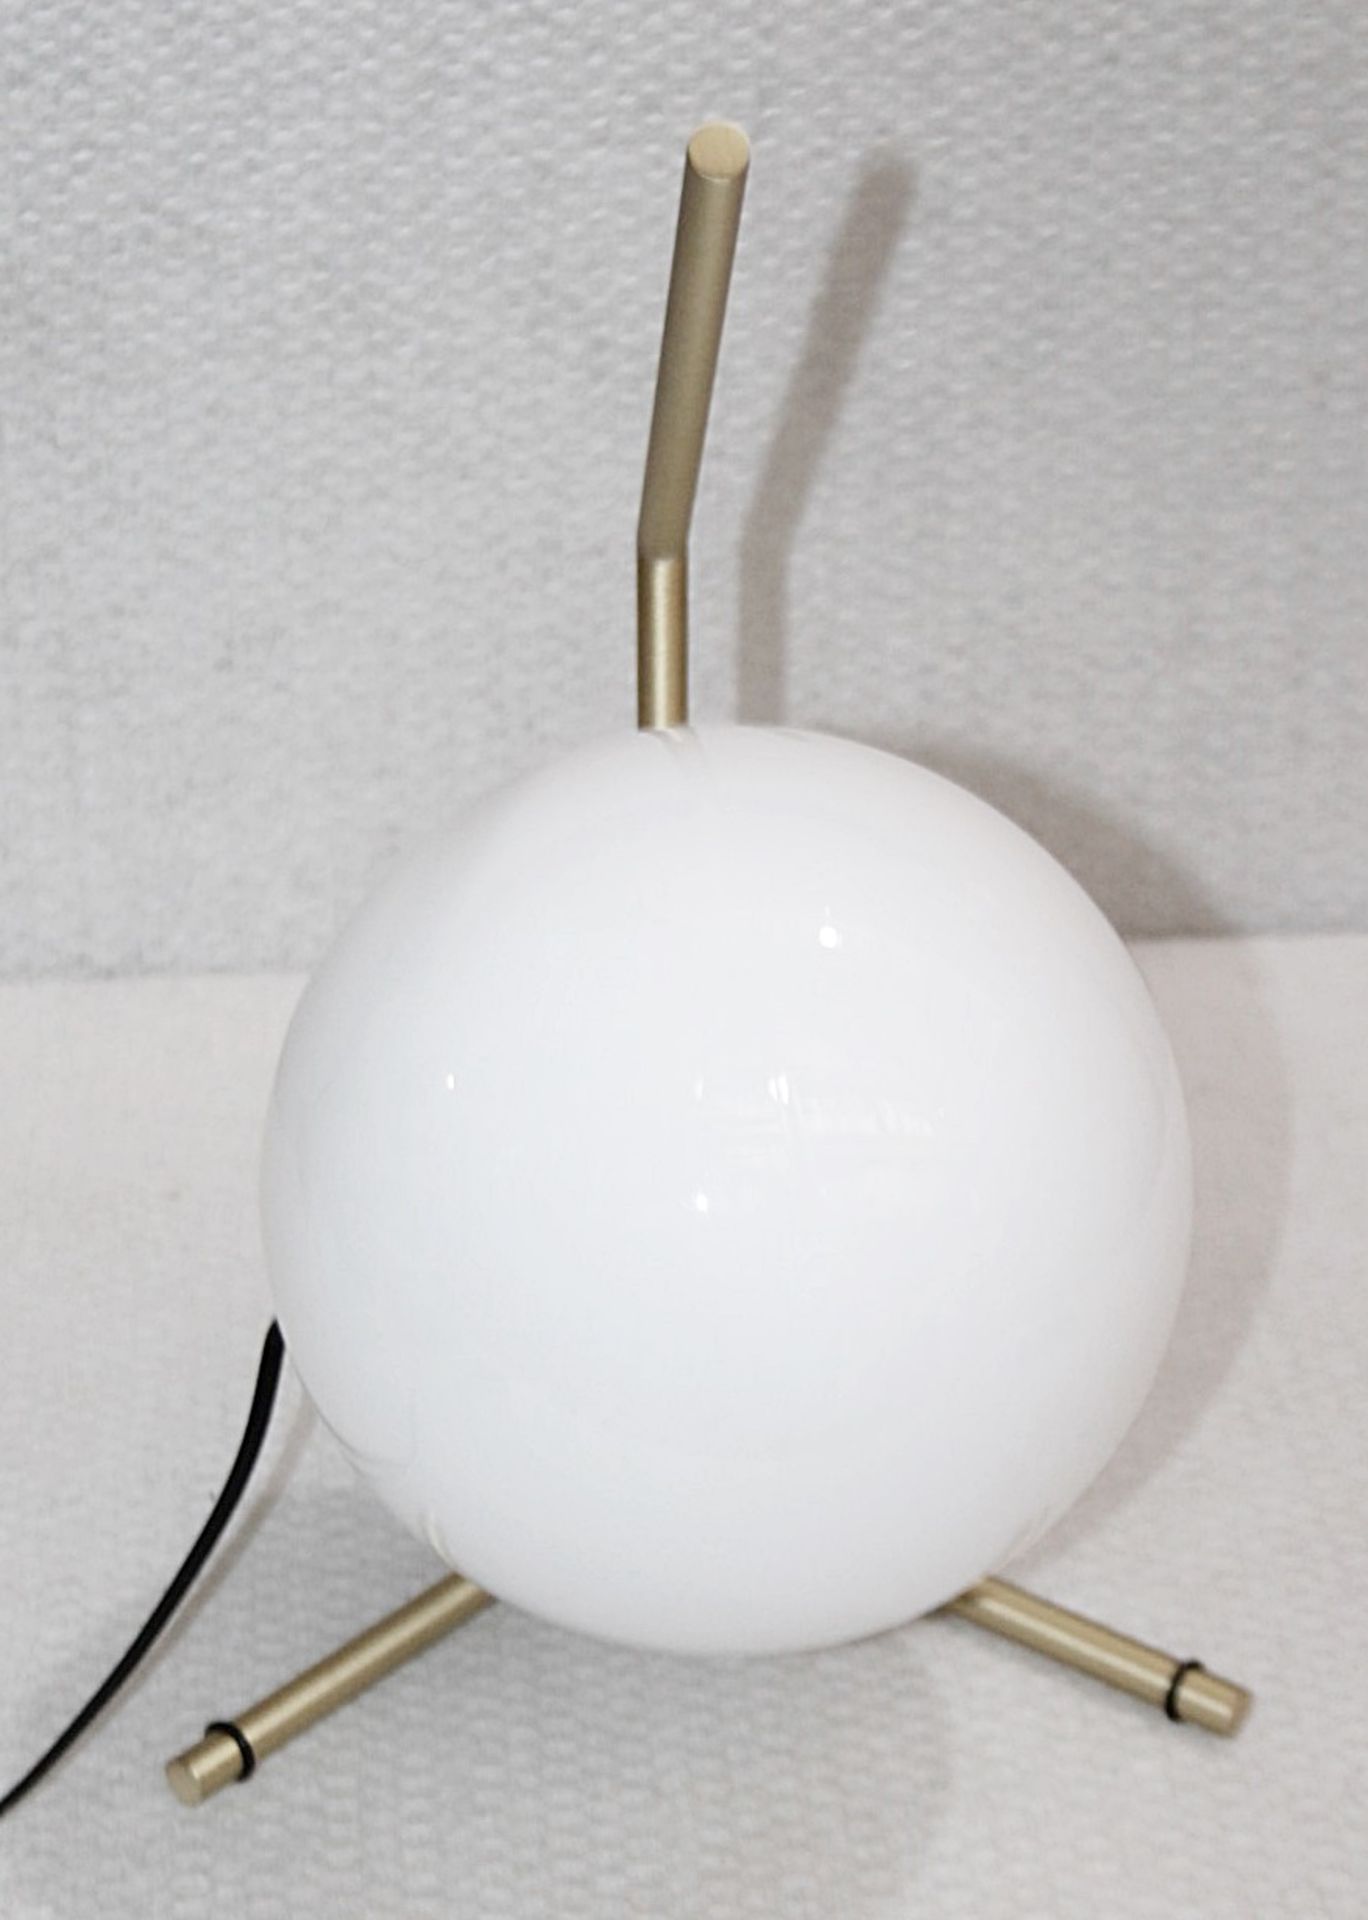 1 x FLOS 'IC T1' Luxury Designer Low Table Lamp With Opal Shade - Original Price £340.00 - Image 4 of 12